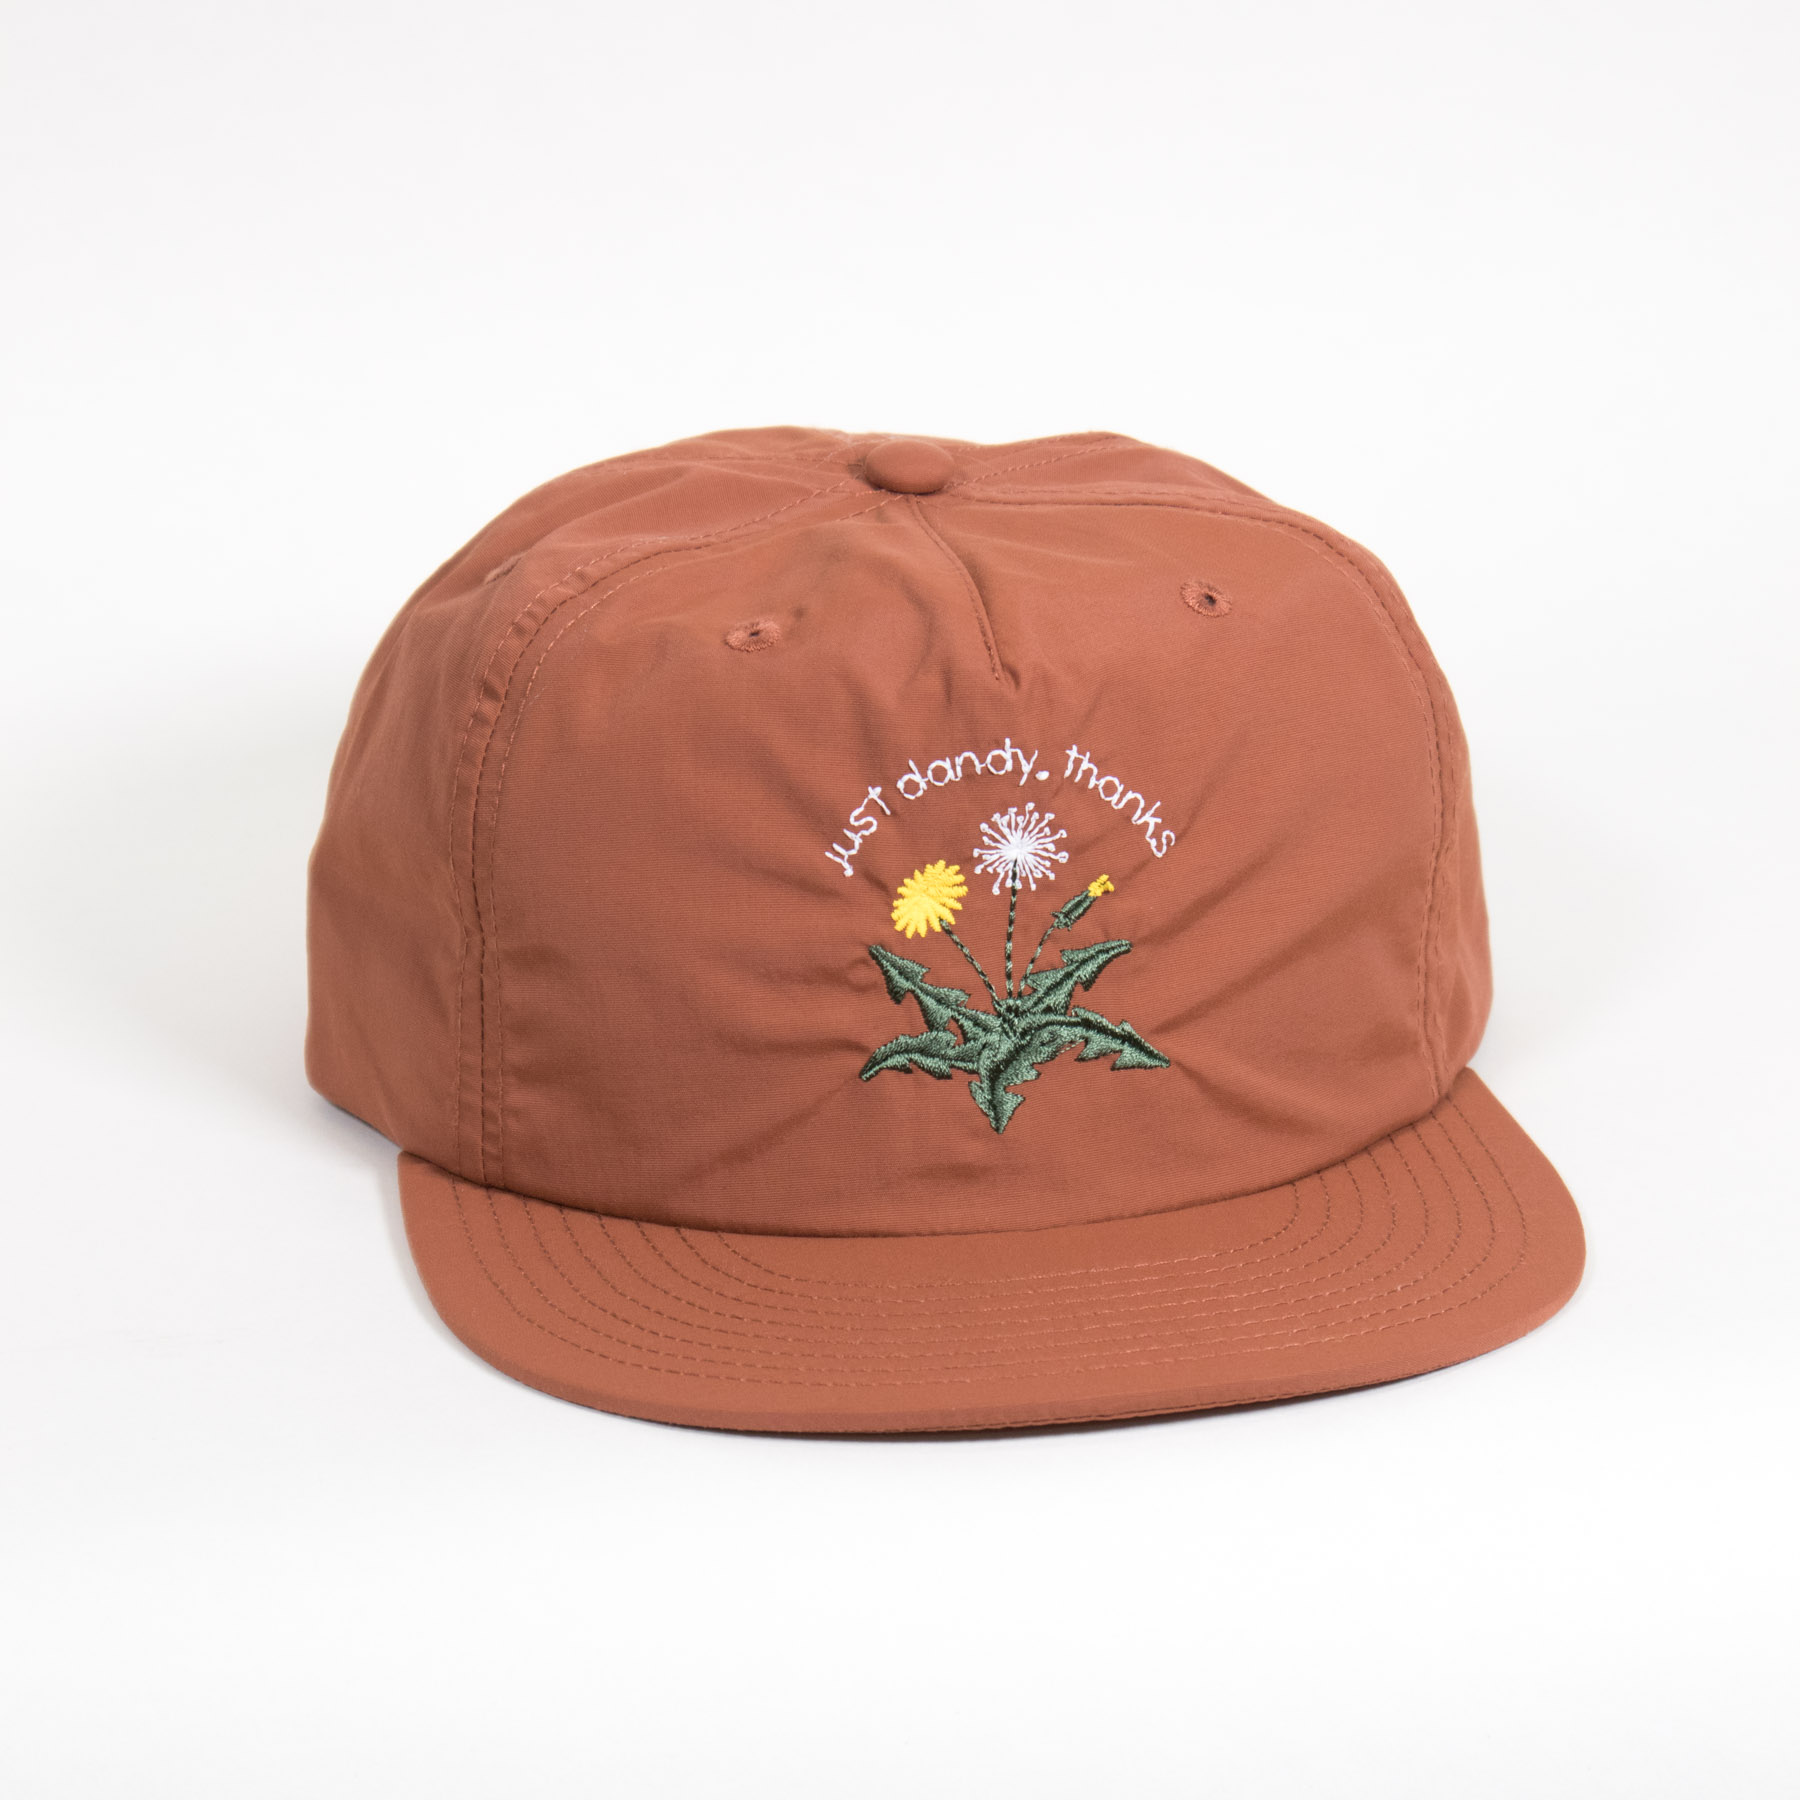 Just Dandy, Thanks! Hat - Crewel and Unusual